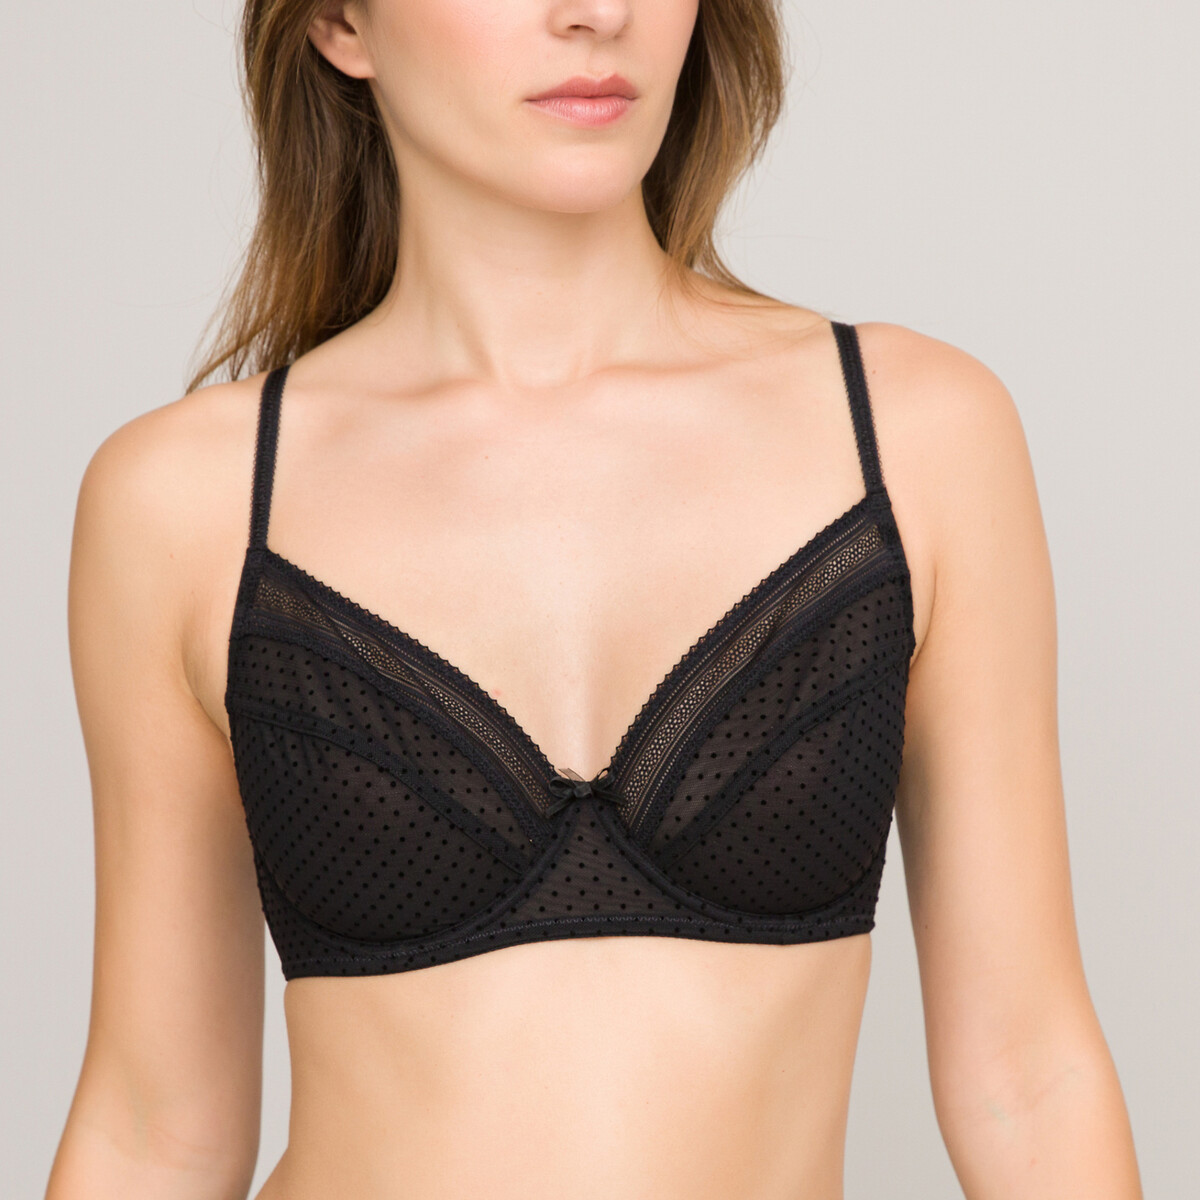 Aerobie Full Cup Bra in Dotted Tulle